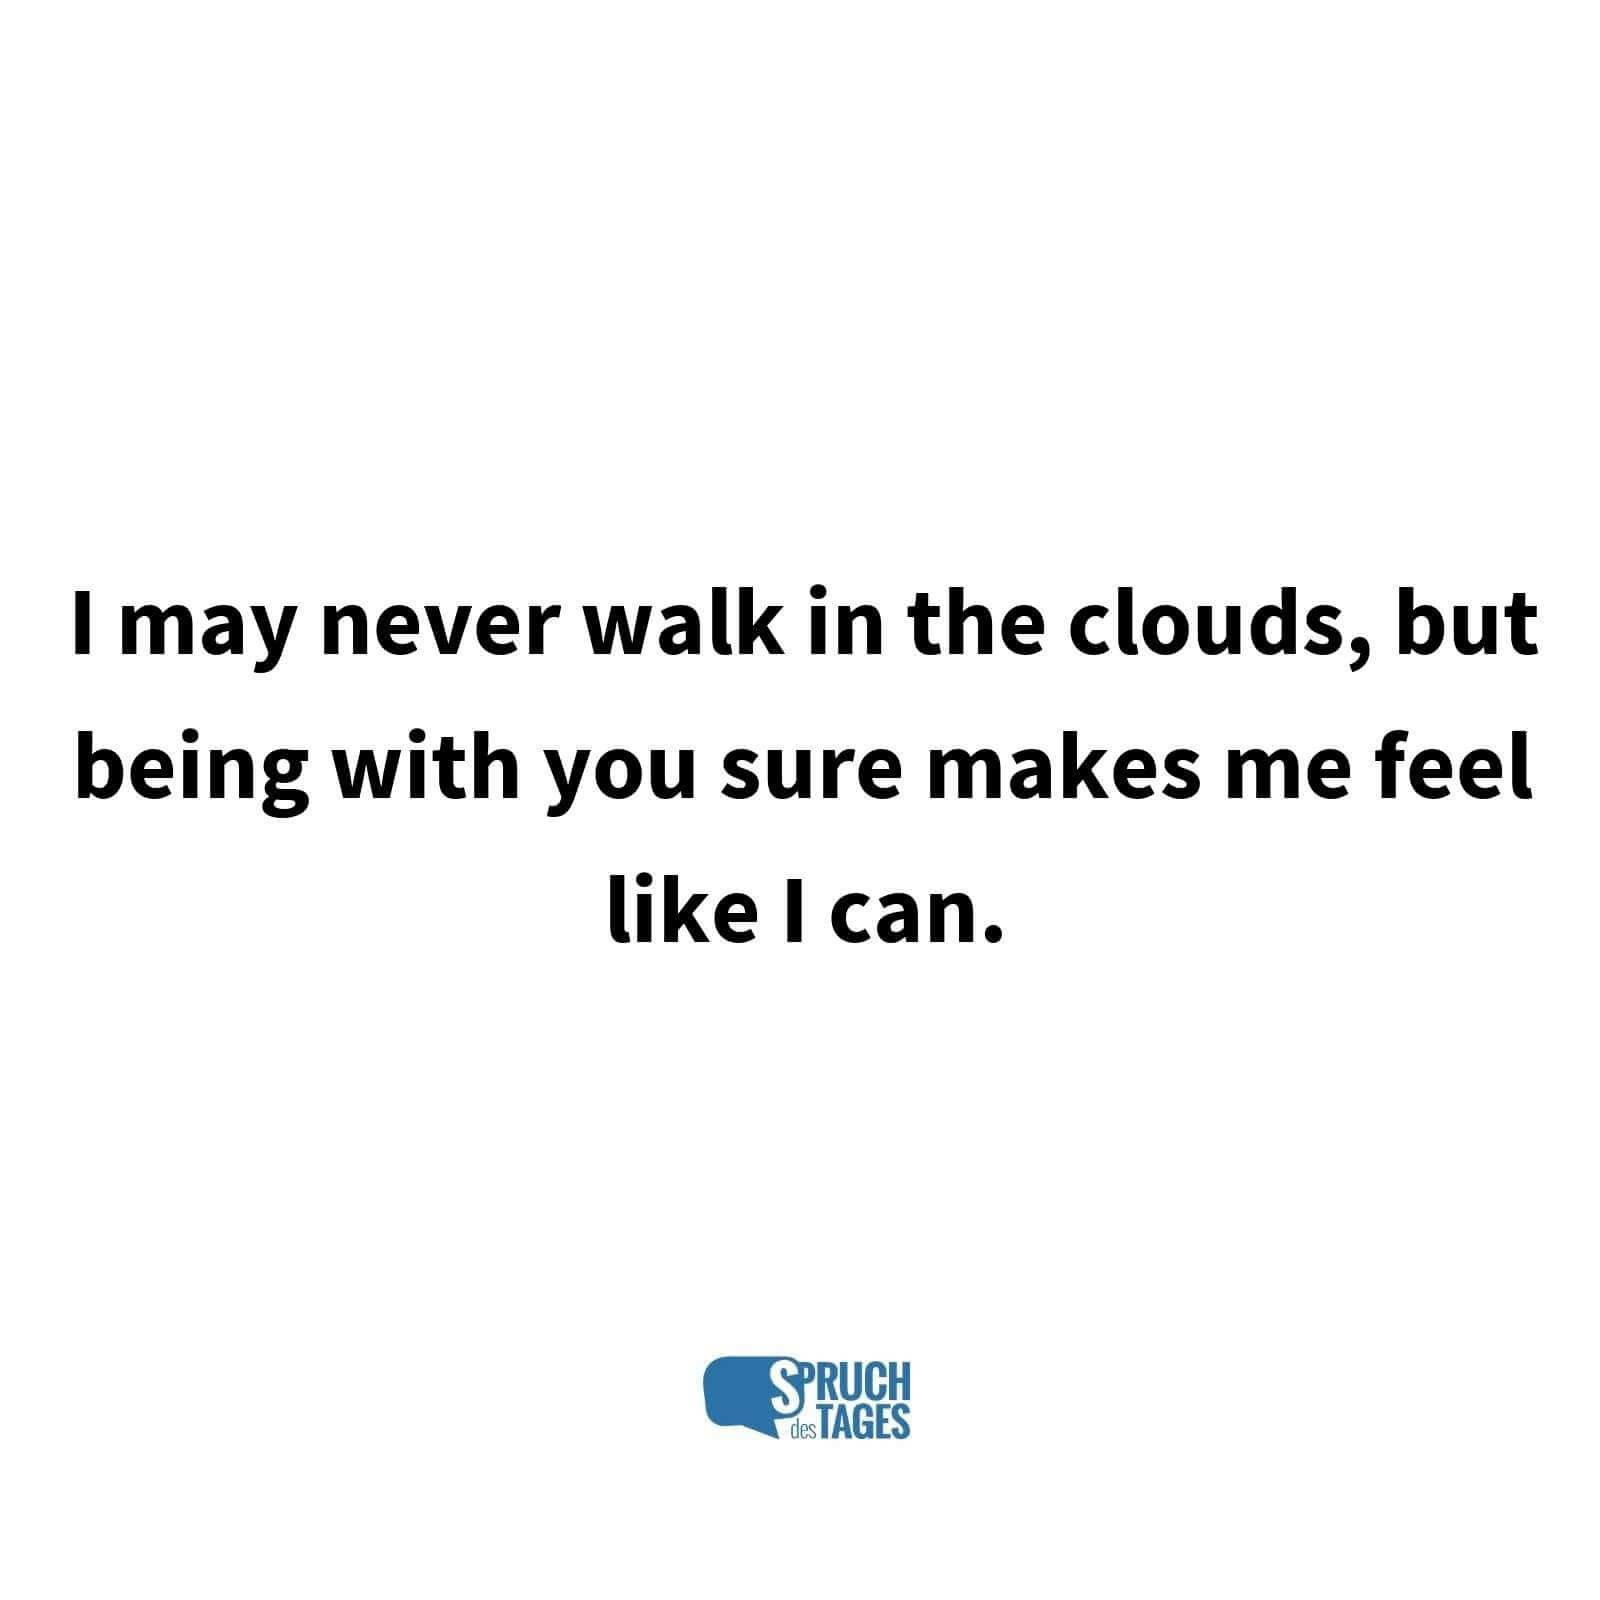 I may never walk in the clouds, but being with you sure makes me feel like I can.